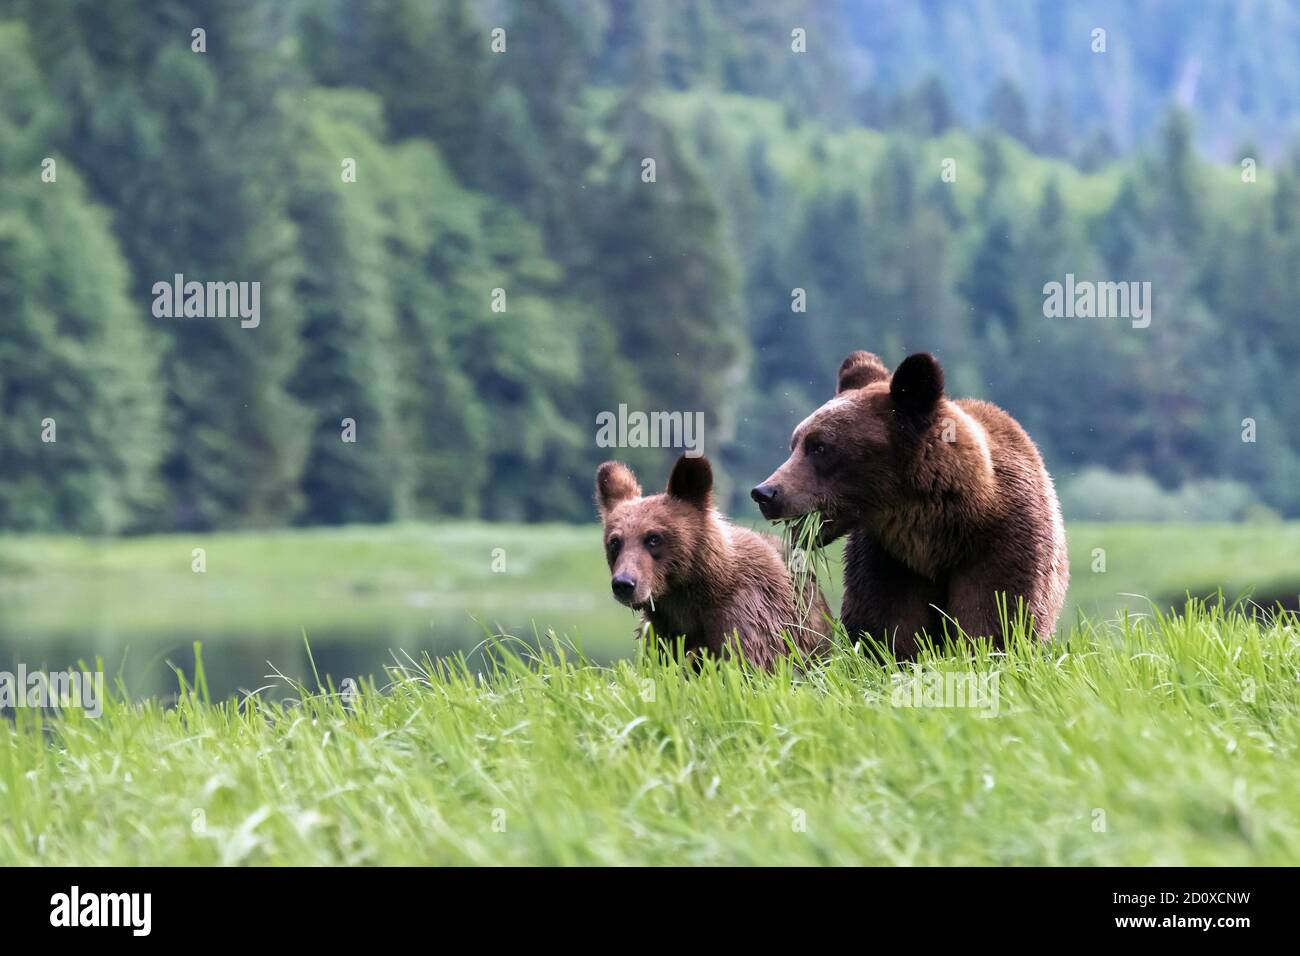 Mother grizzly bear and cub feeding in the sedge grass, Khutzeymateen estuary, British Columbia. Stock Photo